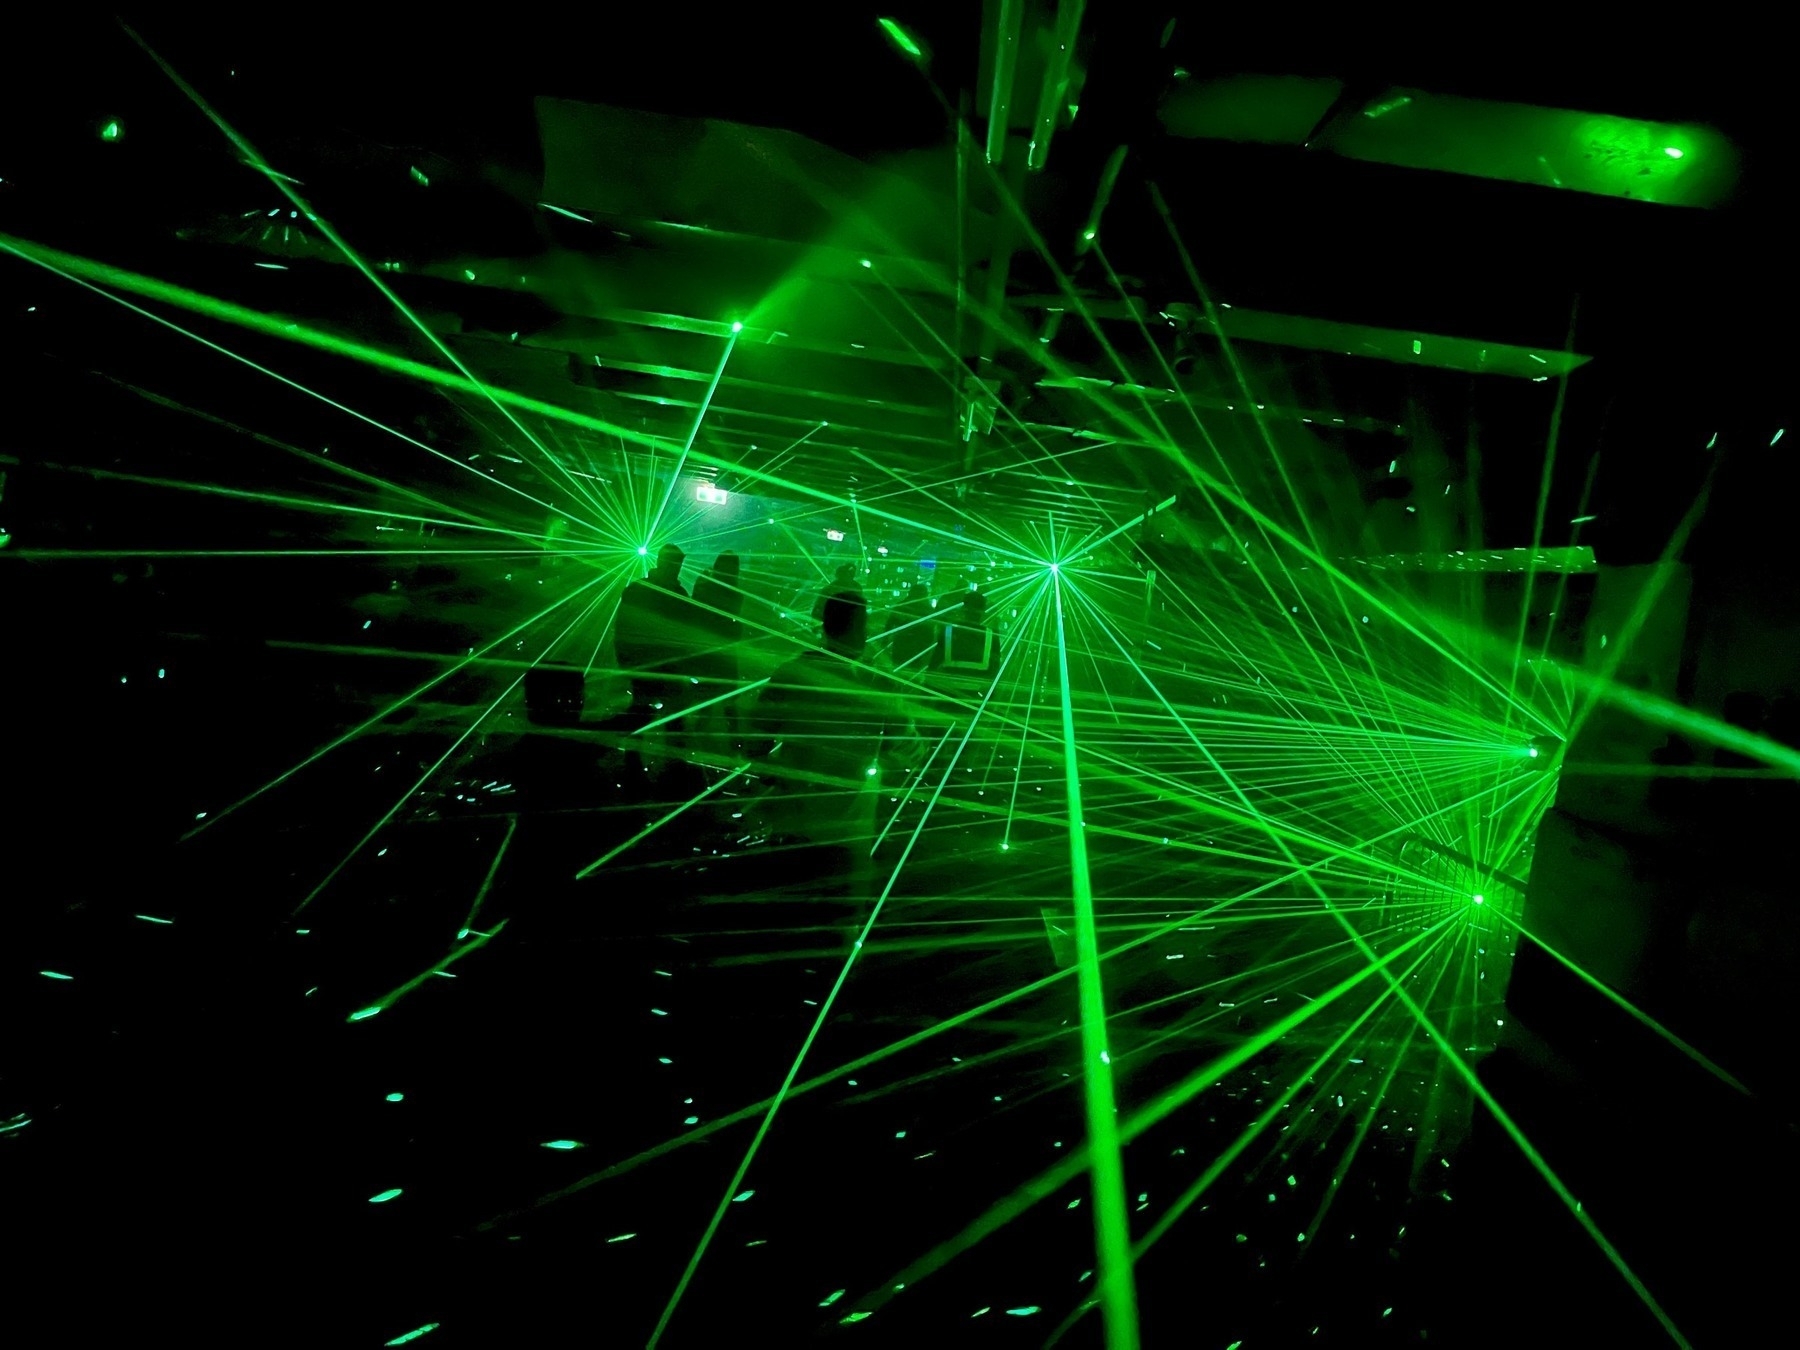 Reflection stage: people's silhouettes among green laser beams